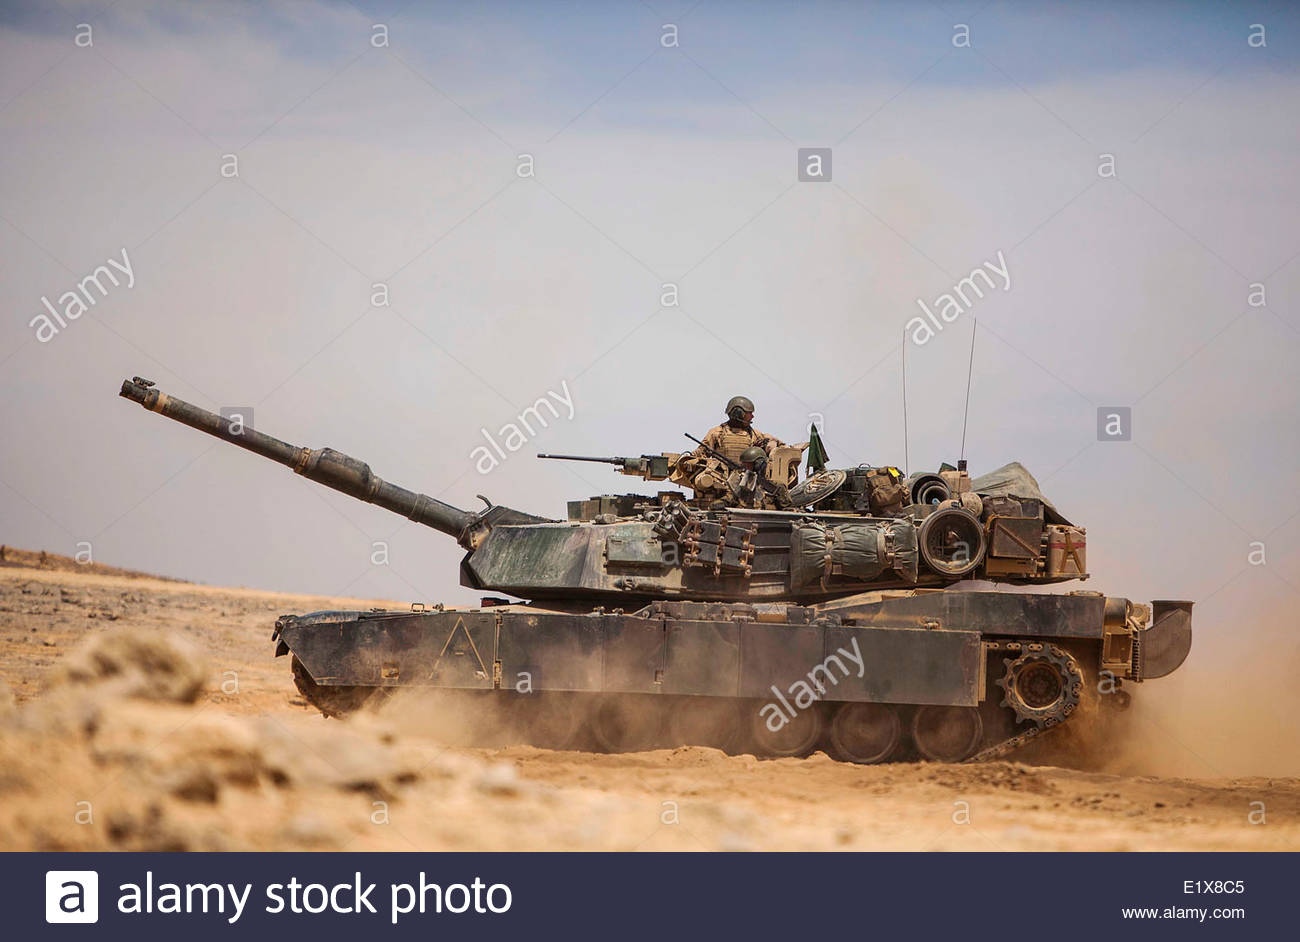 a-us-marine-corps-m1a1-abrams-battle-tank-assigned-to-the-22nd-marine-E1X8C5.jpg